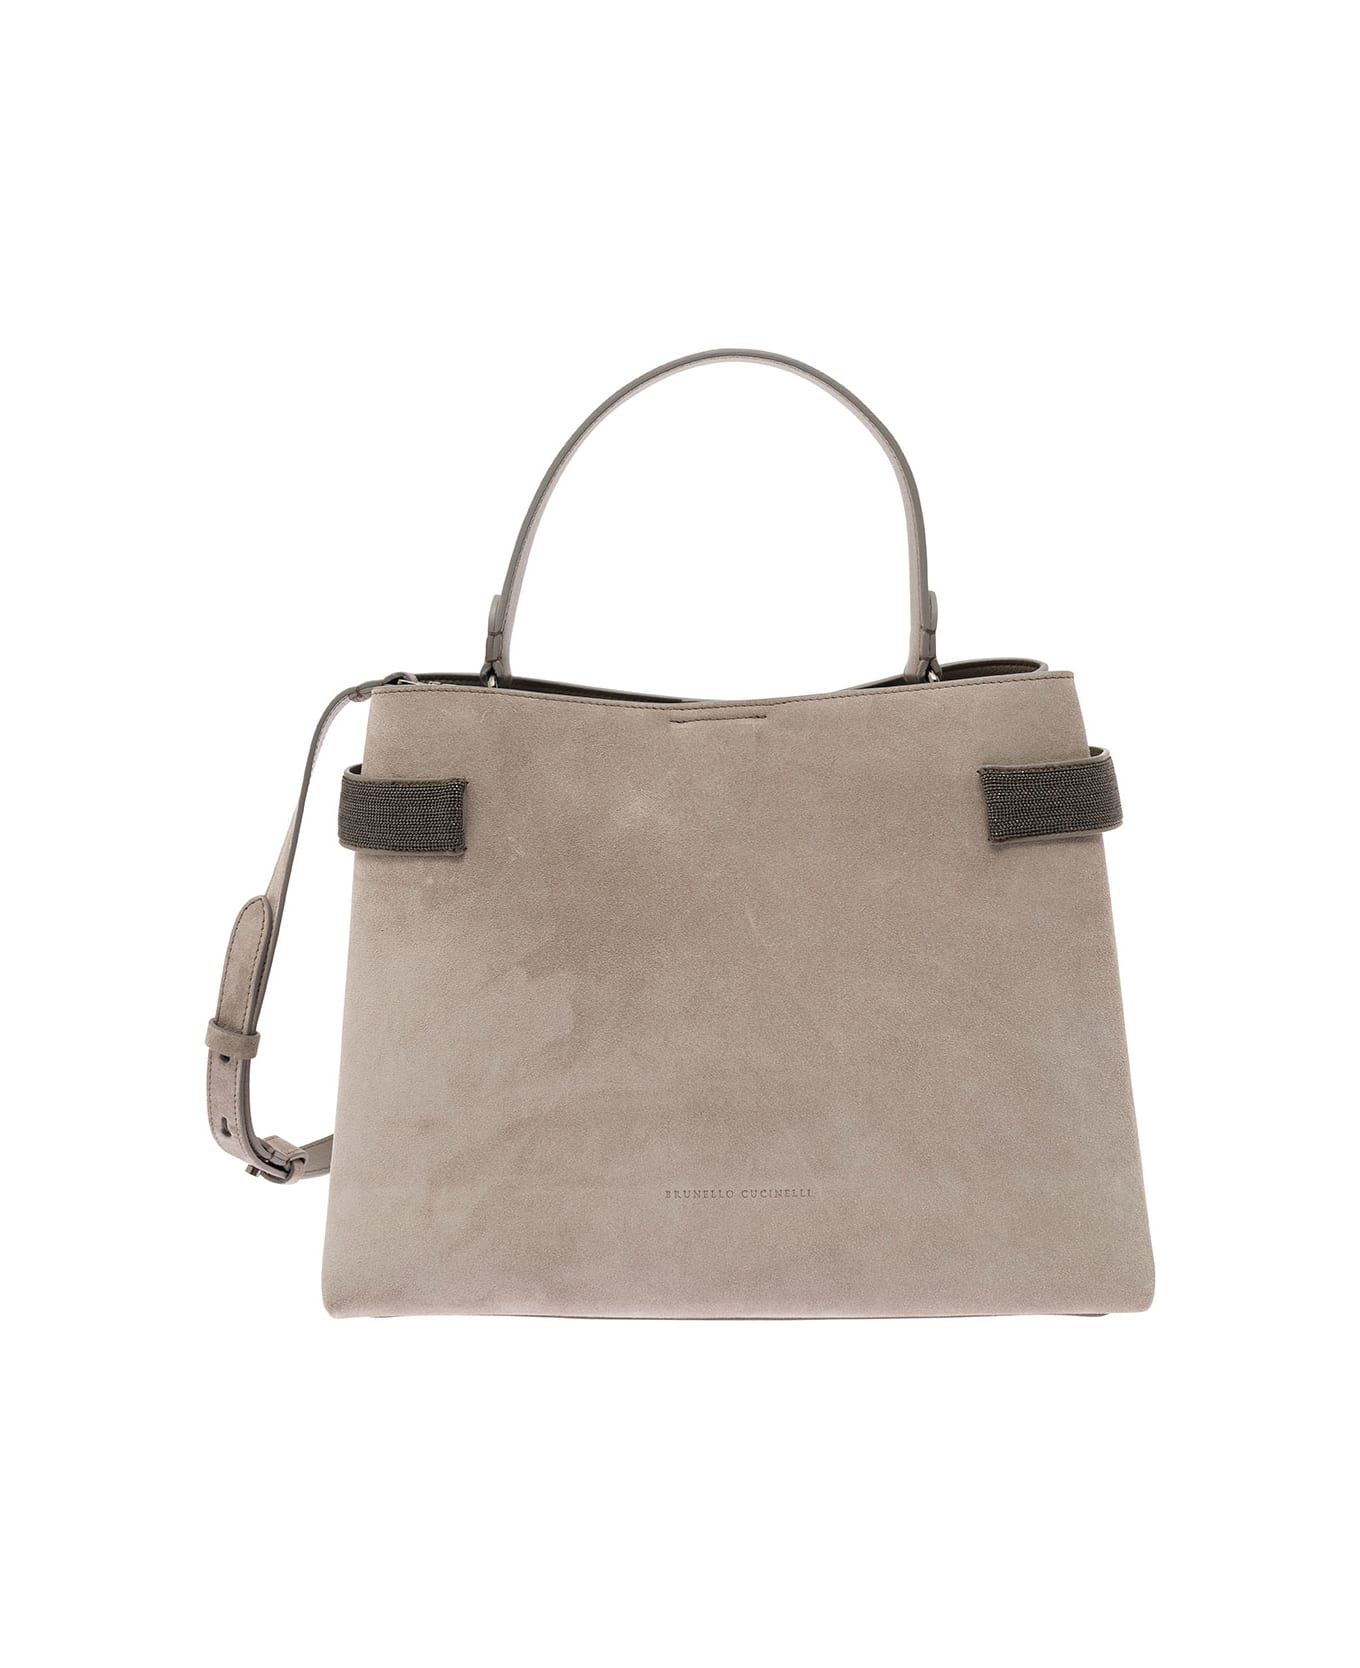 Brunello Cucinelli Grey Crossbody Bag With Precious Bands In Leather Woman - Grey トートバッグ